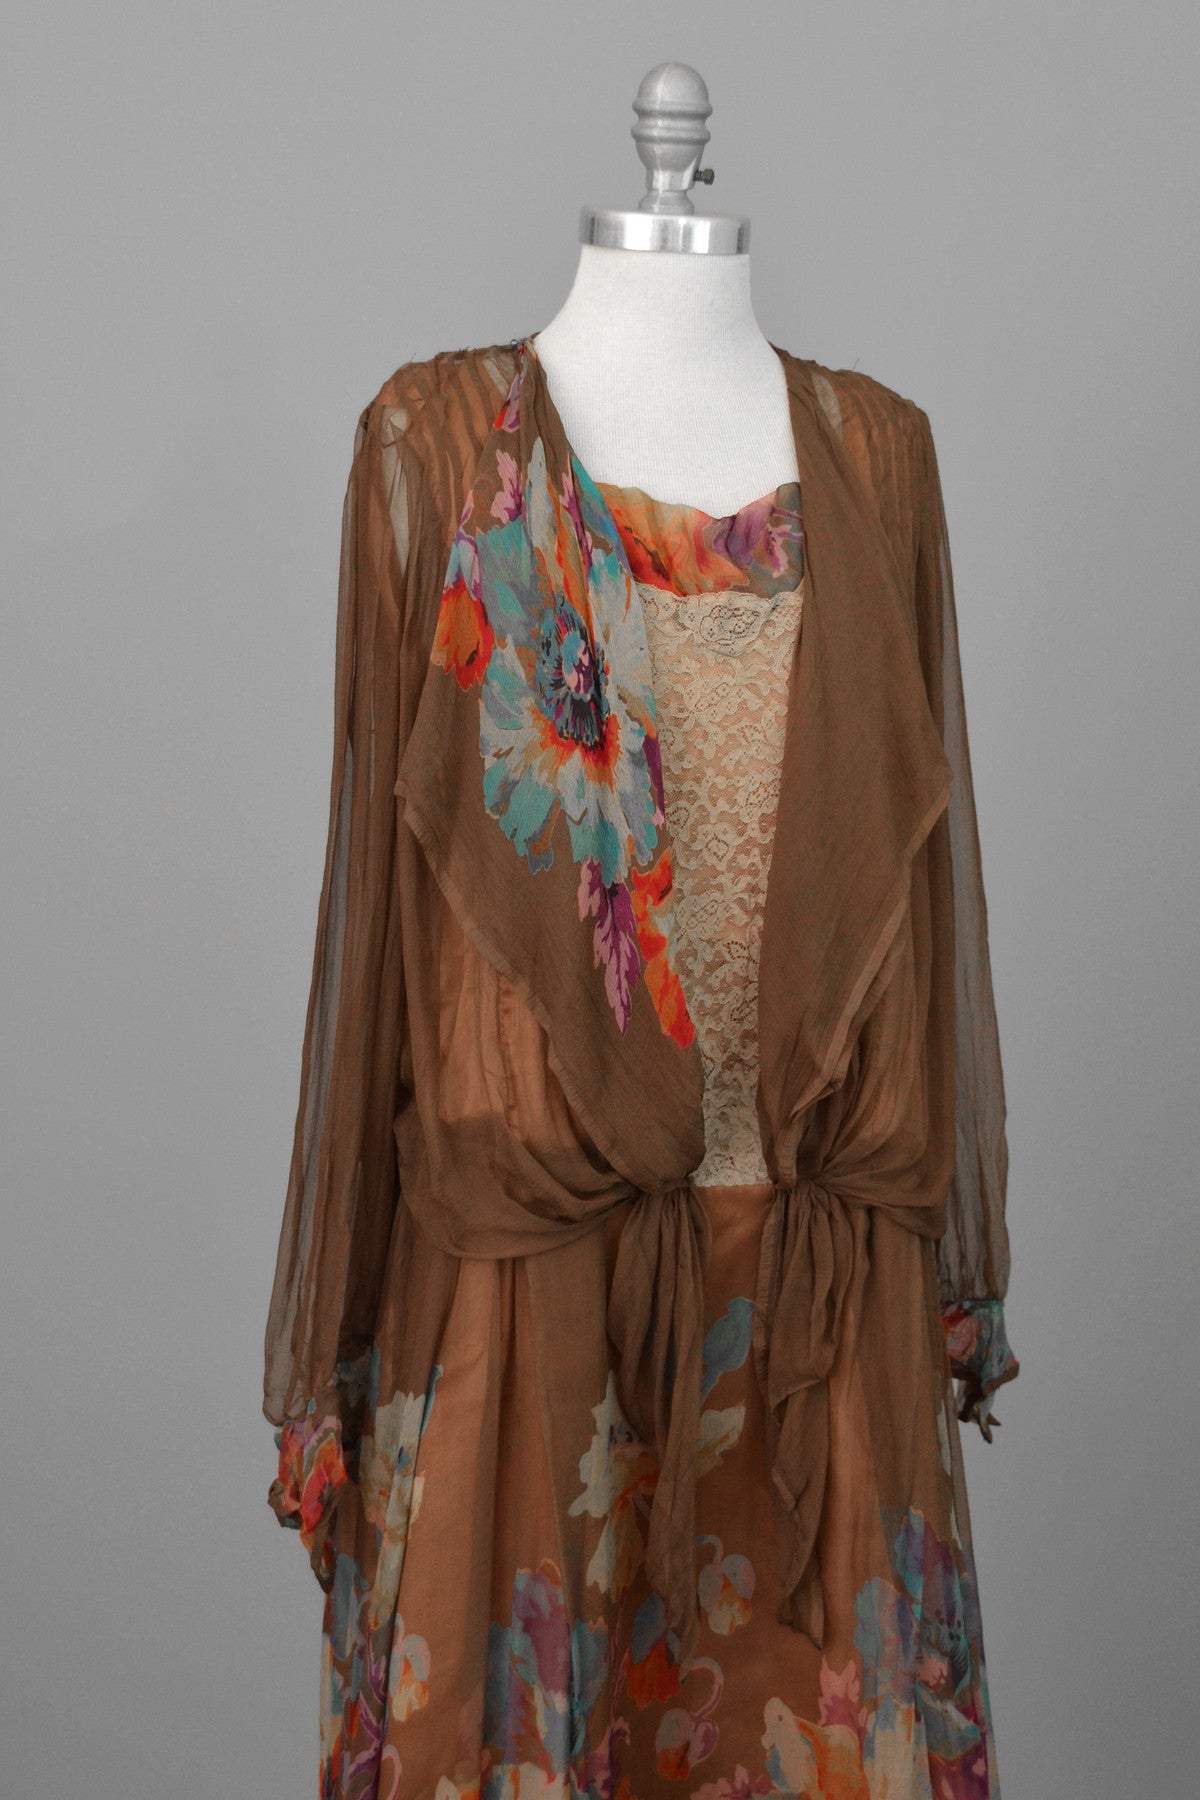 1920s Mocha Chiffon and Lace Vintage Flapper Dress with Vibrant Floral Print